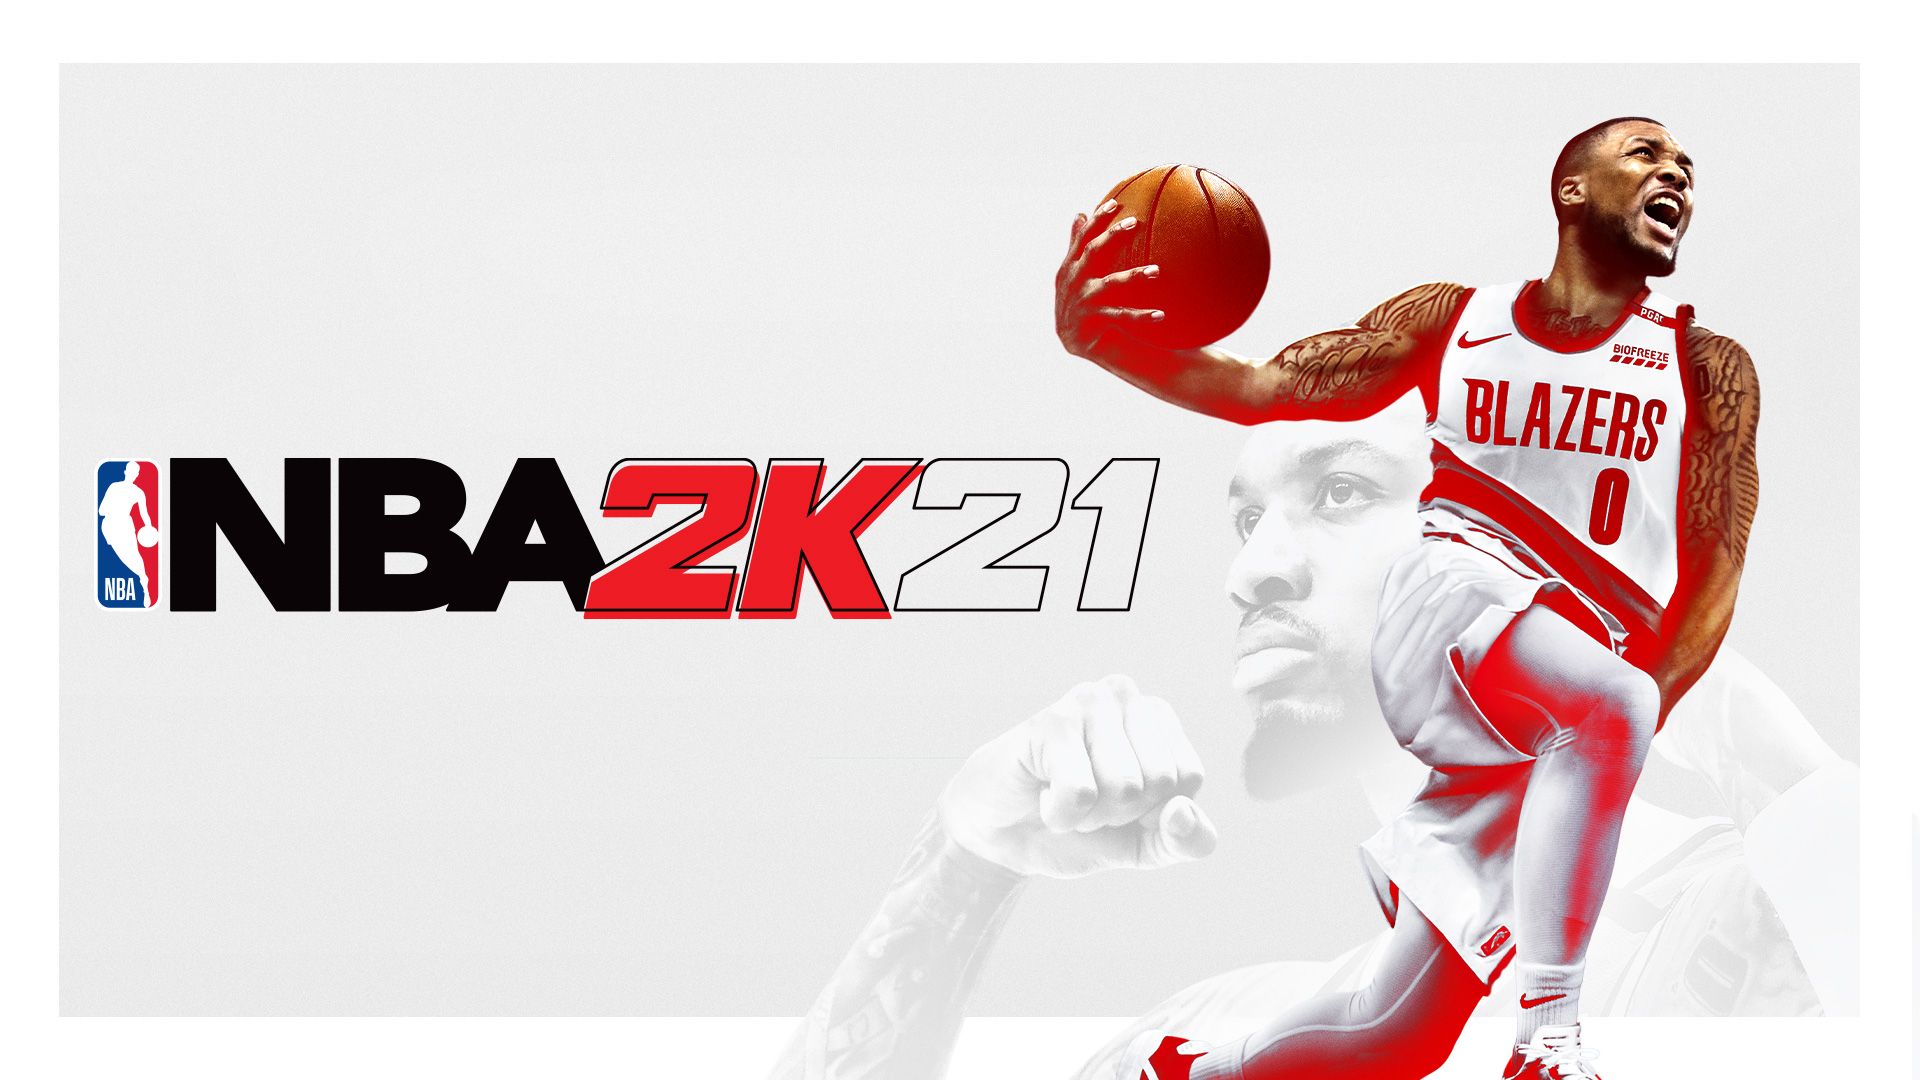 NBA 2K21 for Nintendo Switch Game Details